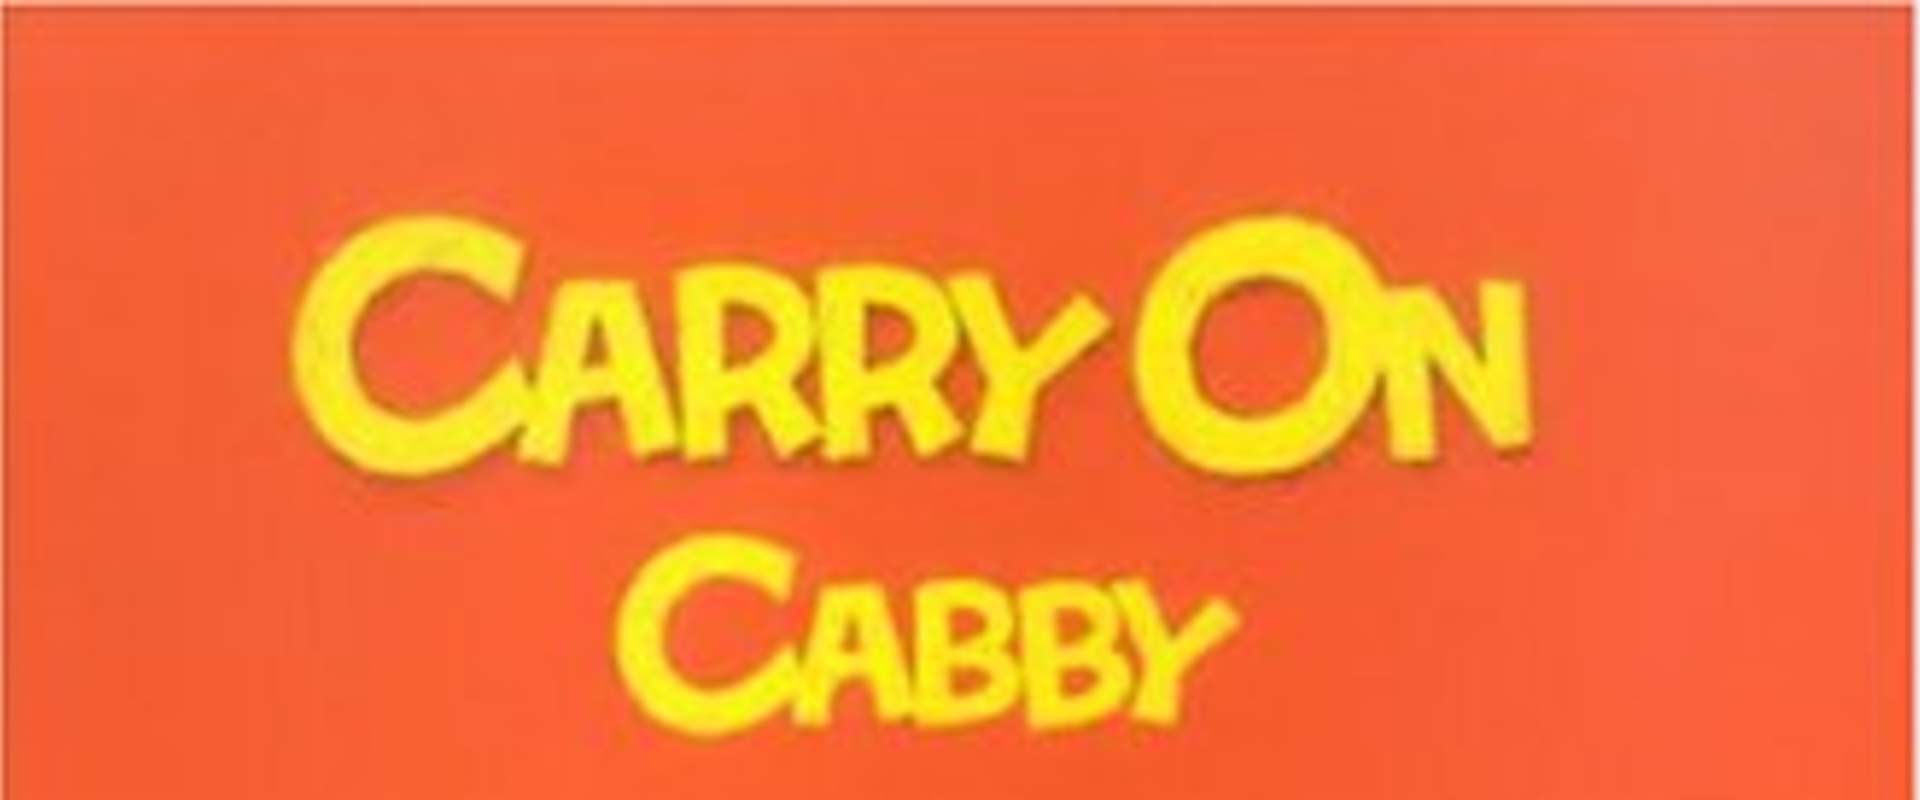 Carry on Cabby background 2